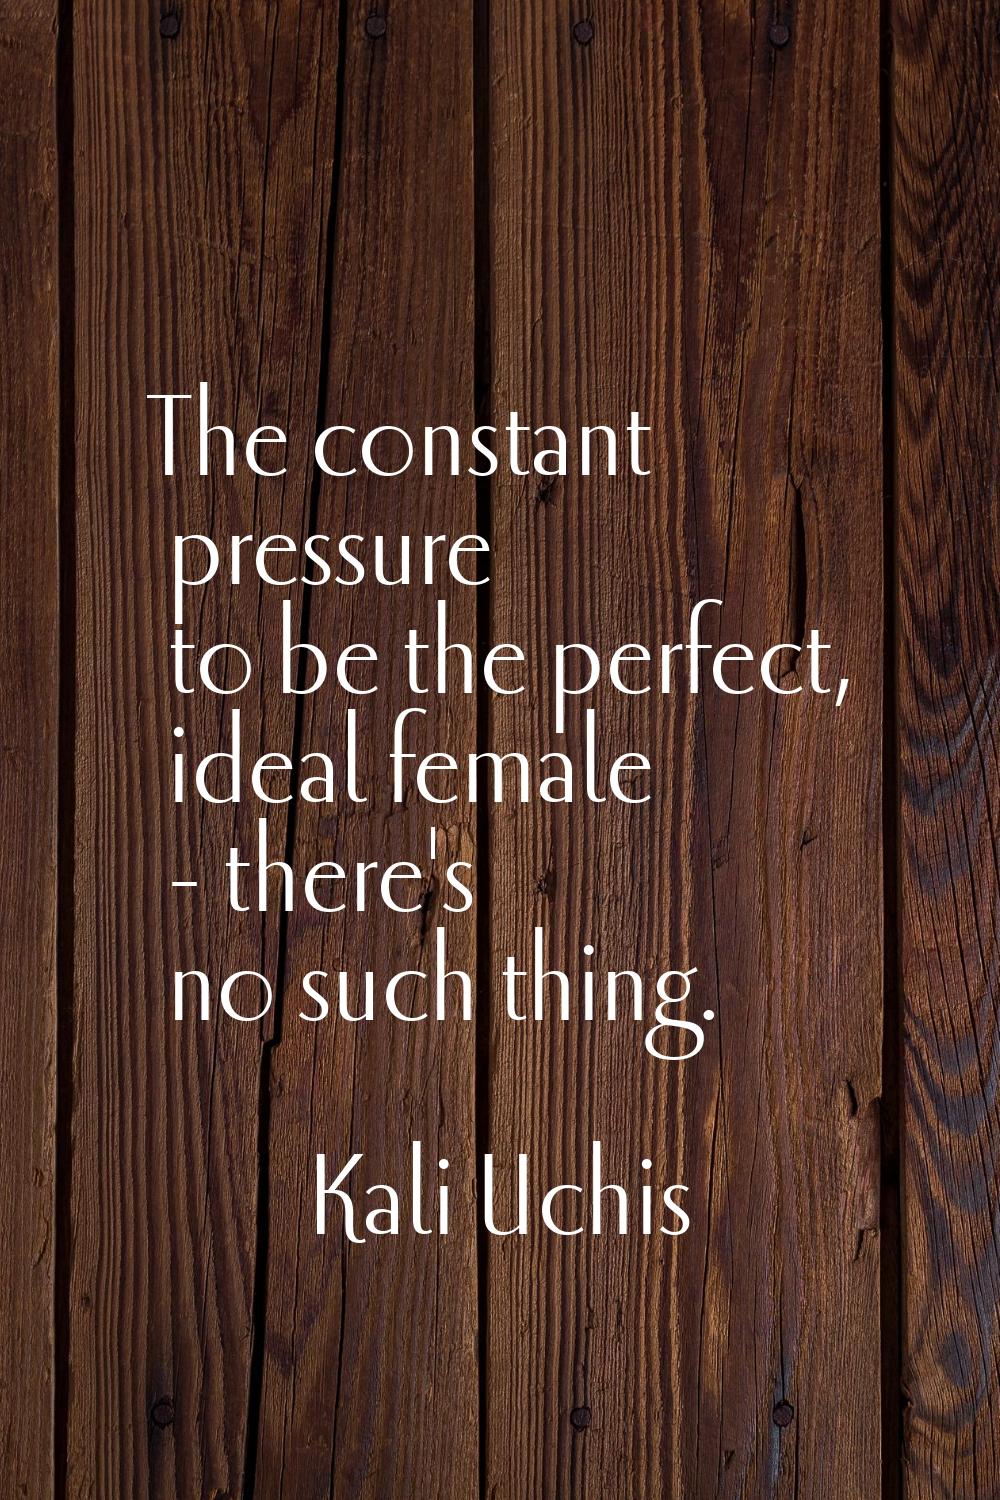 The constant pressure to be the perfect, ideal female - there's no such thing.